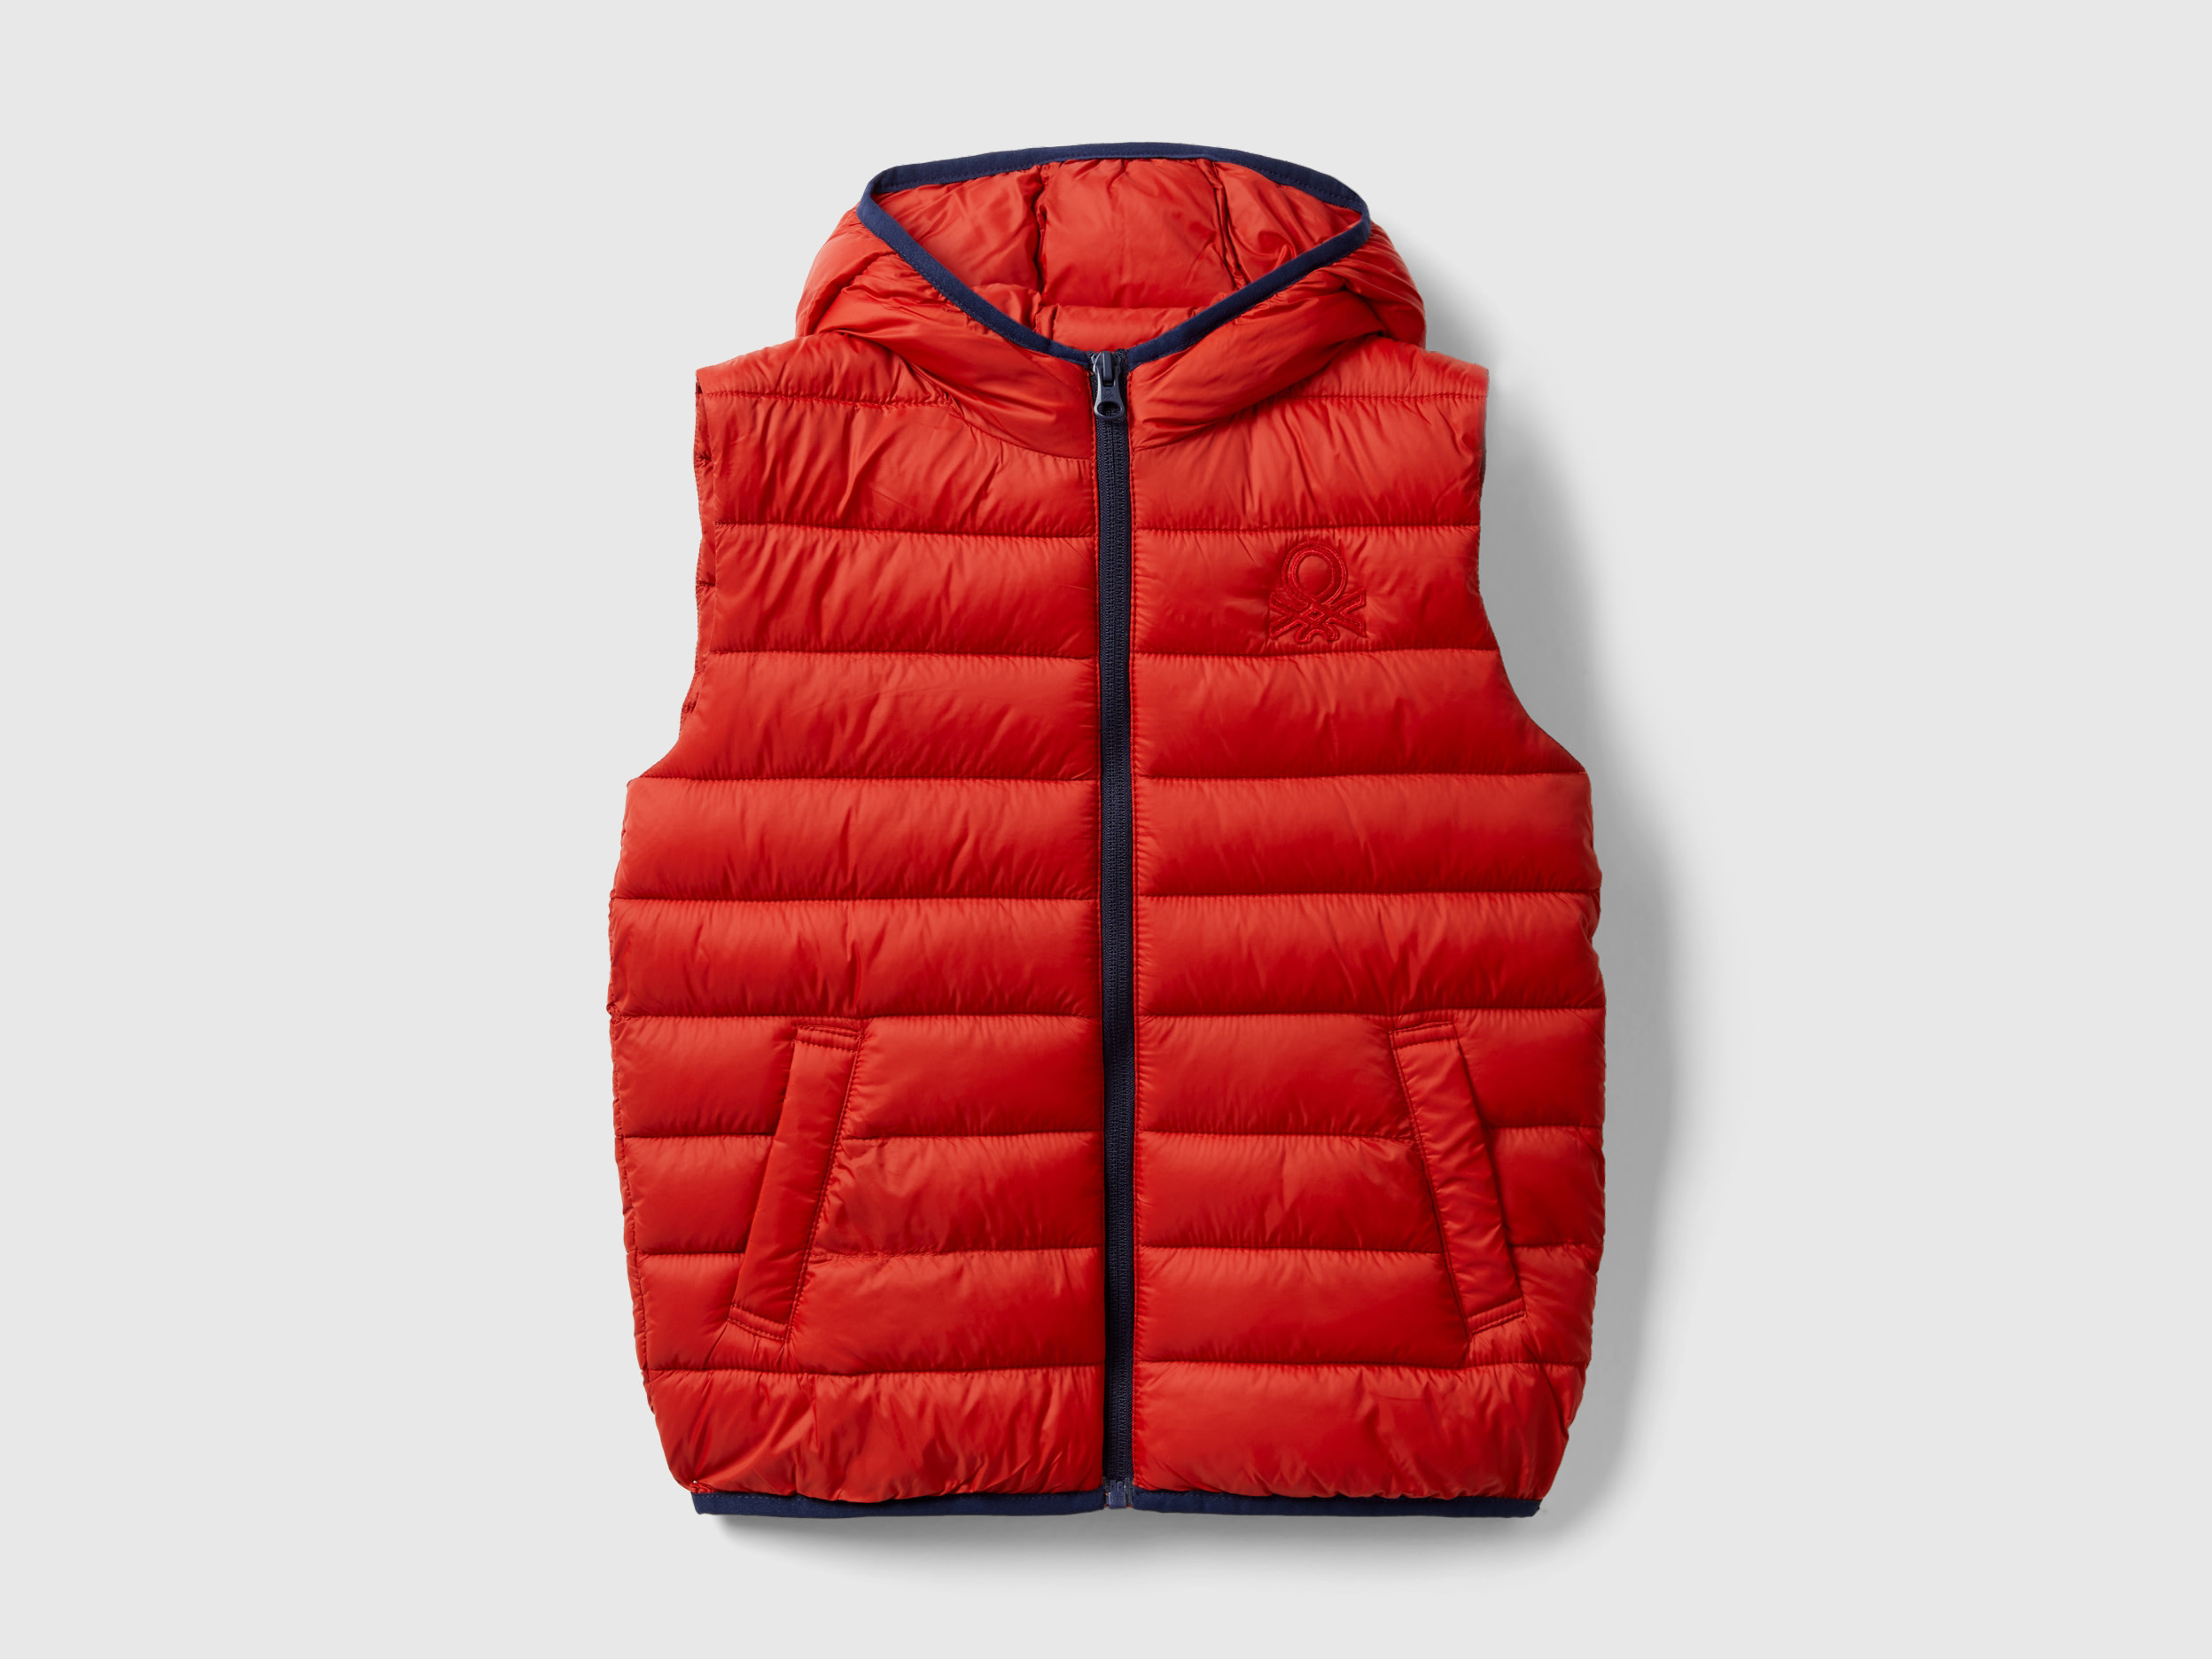 Benetton, Padded Jacket With Hood, size S, Brick Red, Kids